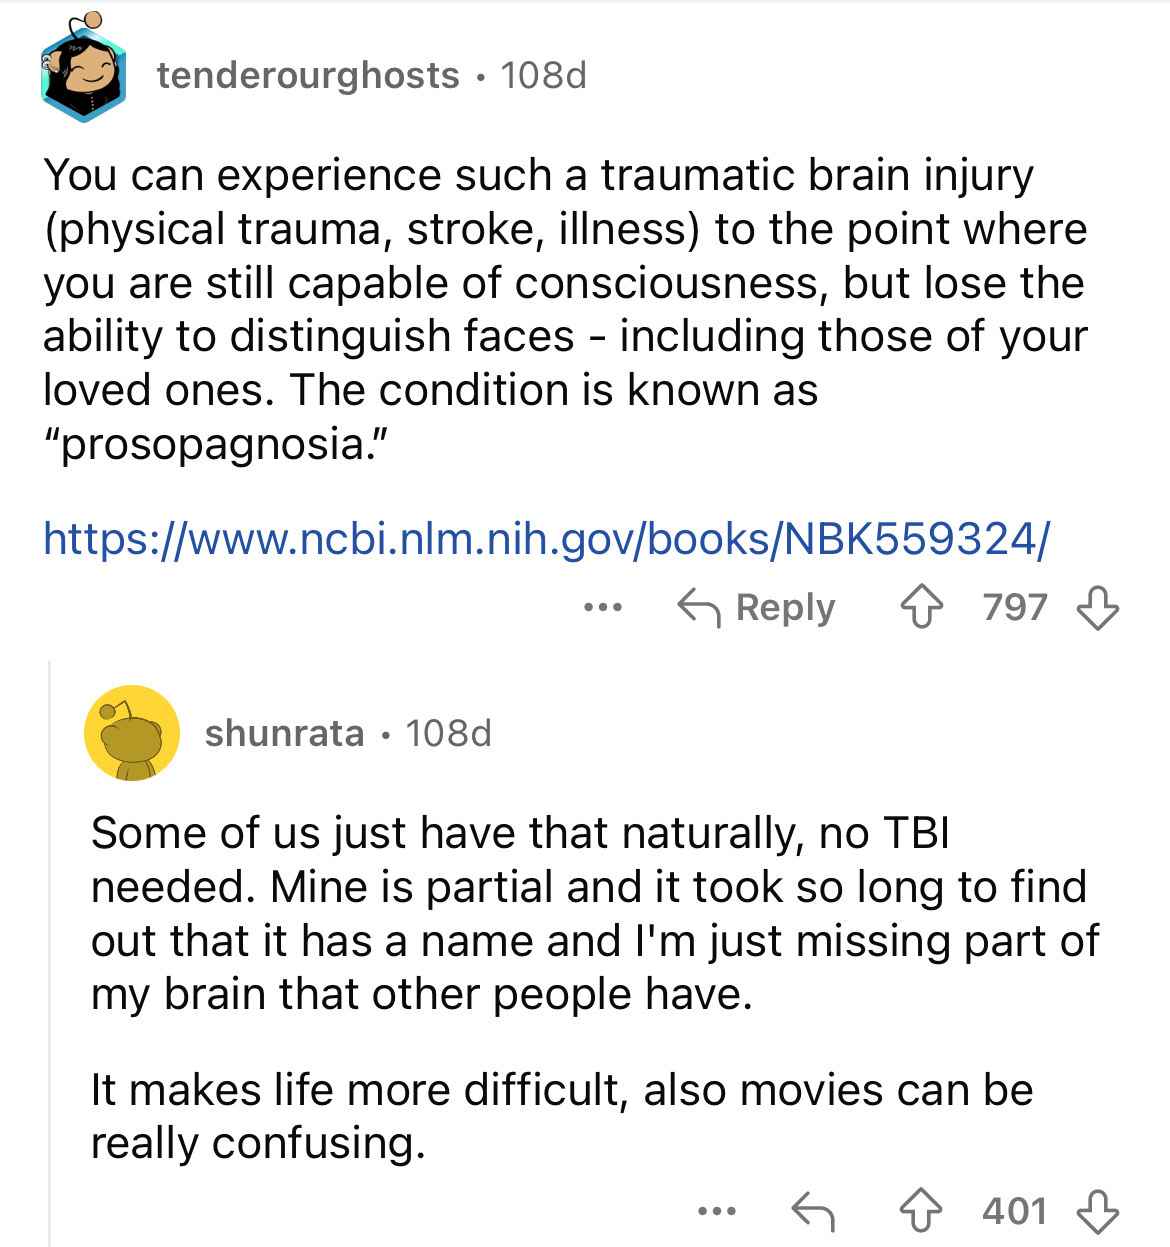 screenshot - tenderourghosts 108d You can experience such a traumatic brain injury physical trauma, stroke, illness to the point where you are still capable of consciousness, but lose the ability to distinguish faces including those of your loved ones. Th